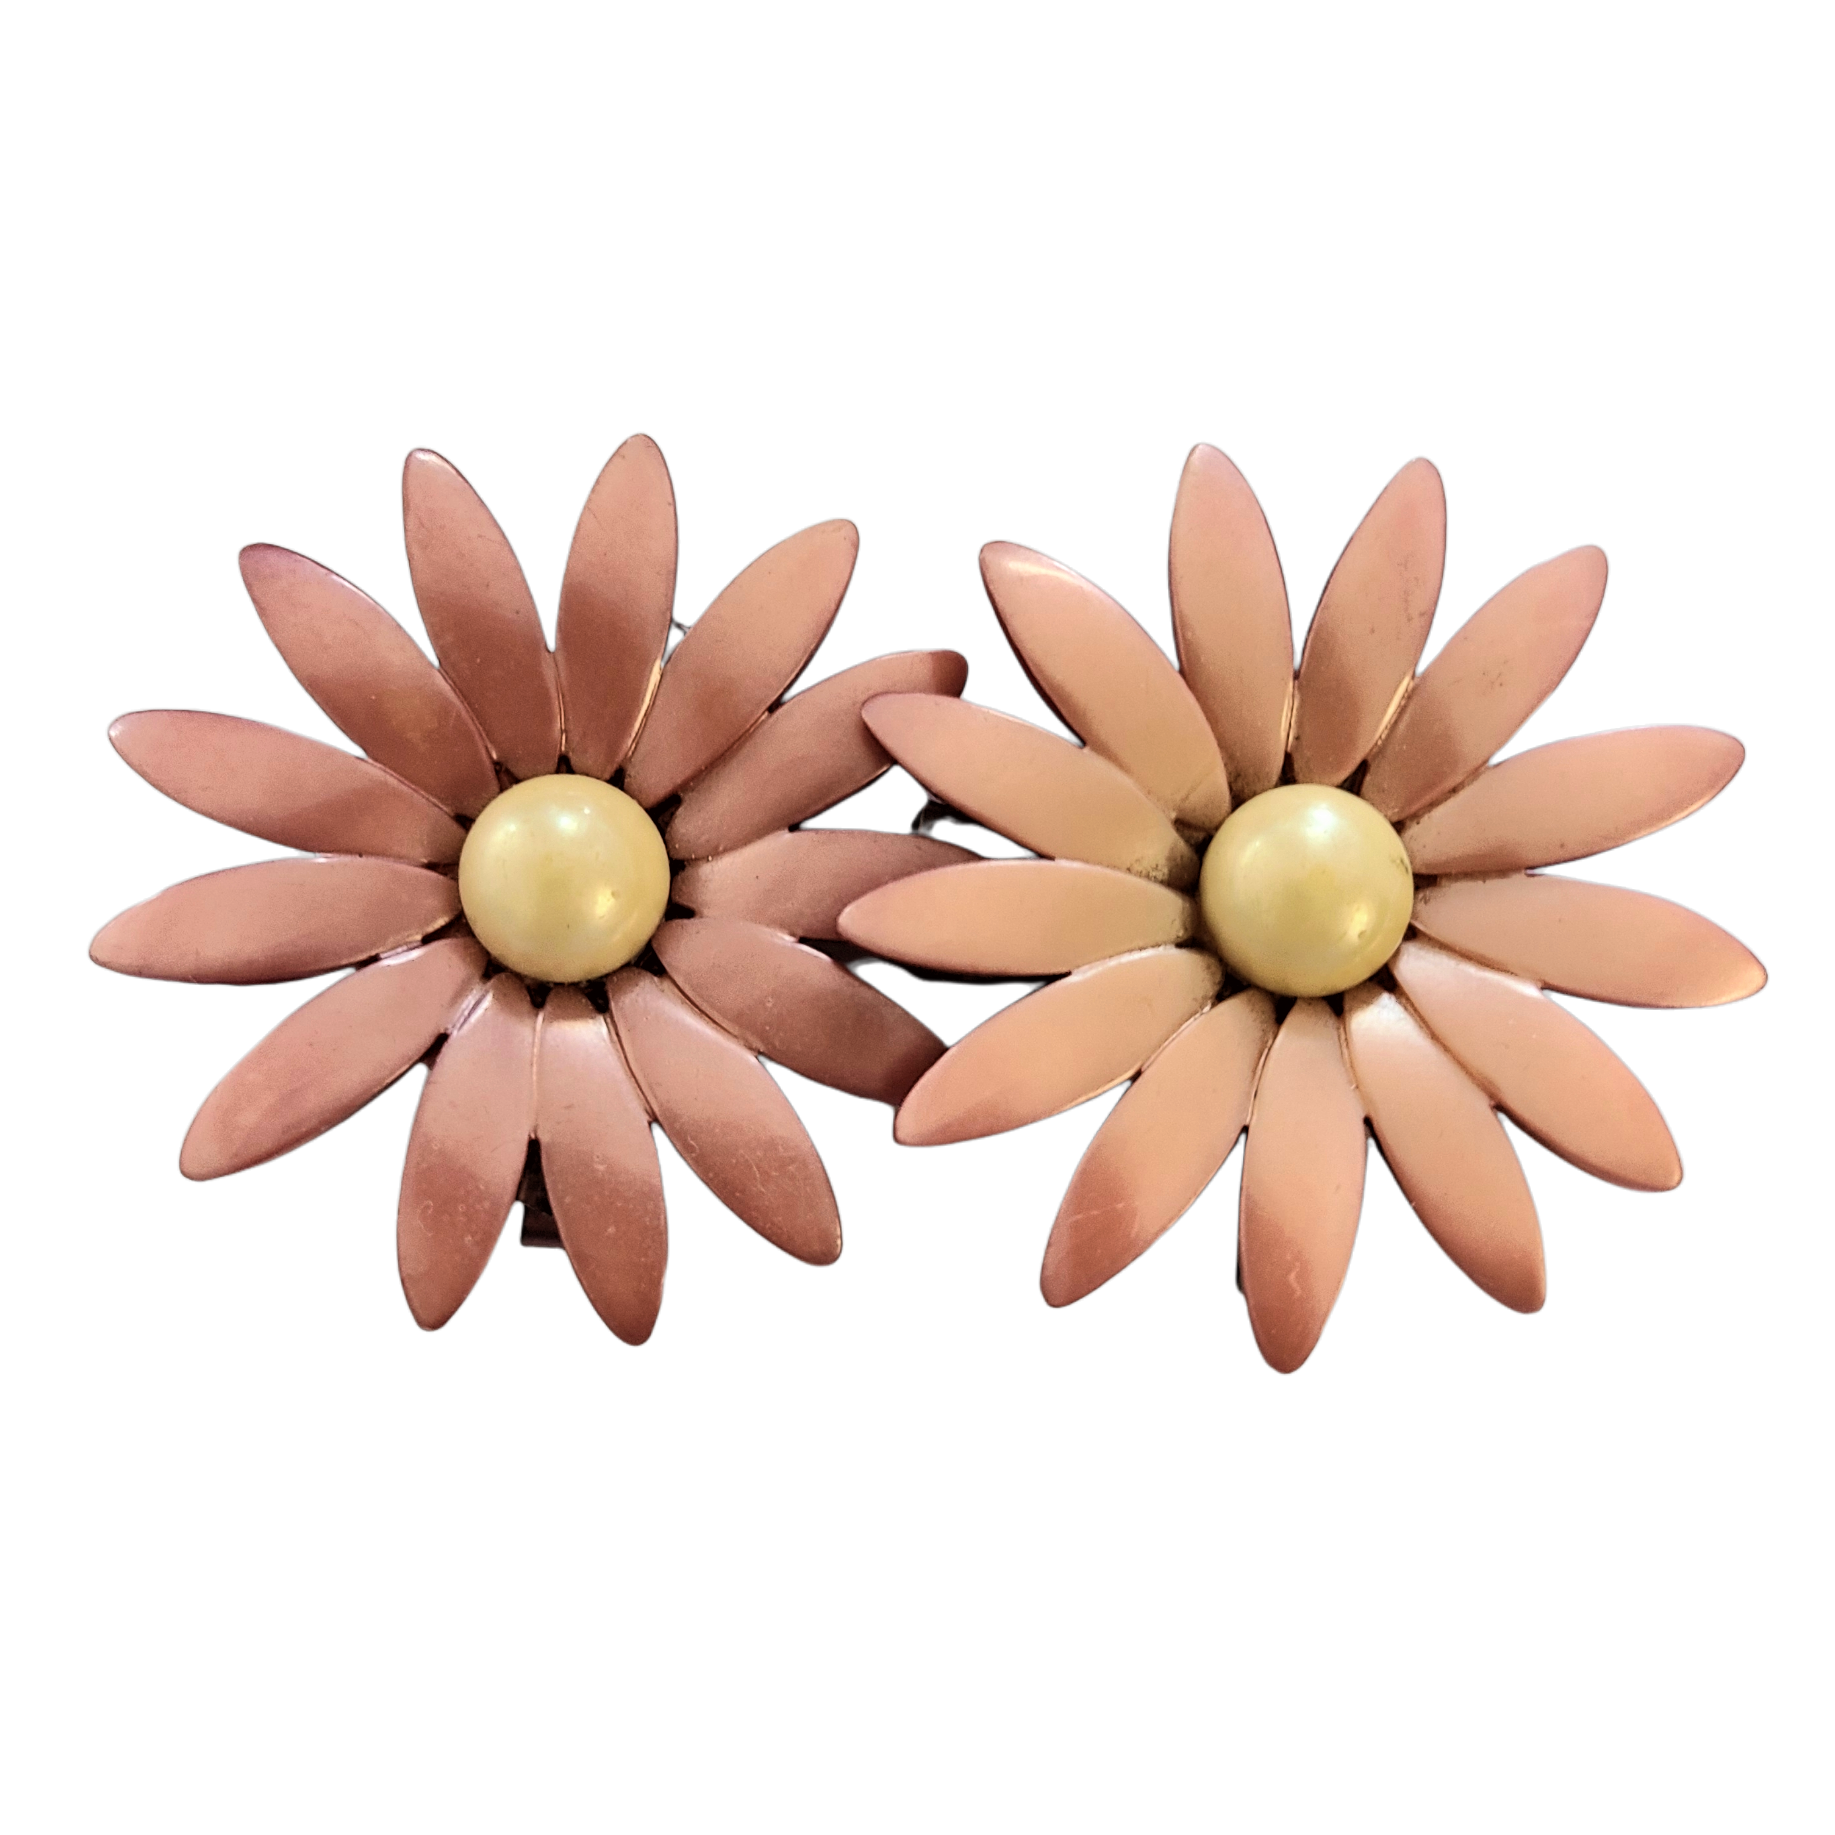 Vintage 1960s Moonglow Pink Daisy Two-Piece Belt Buckle